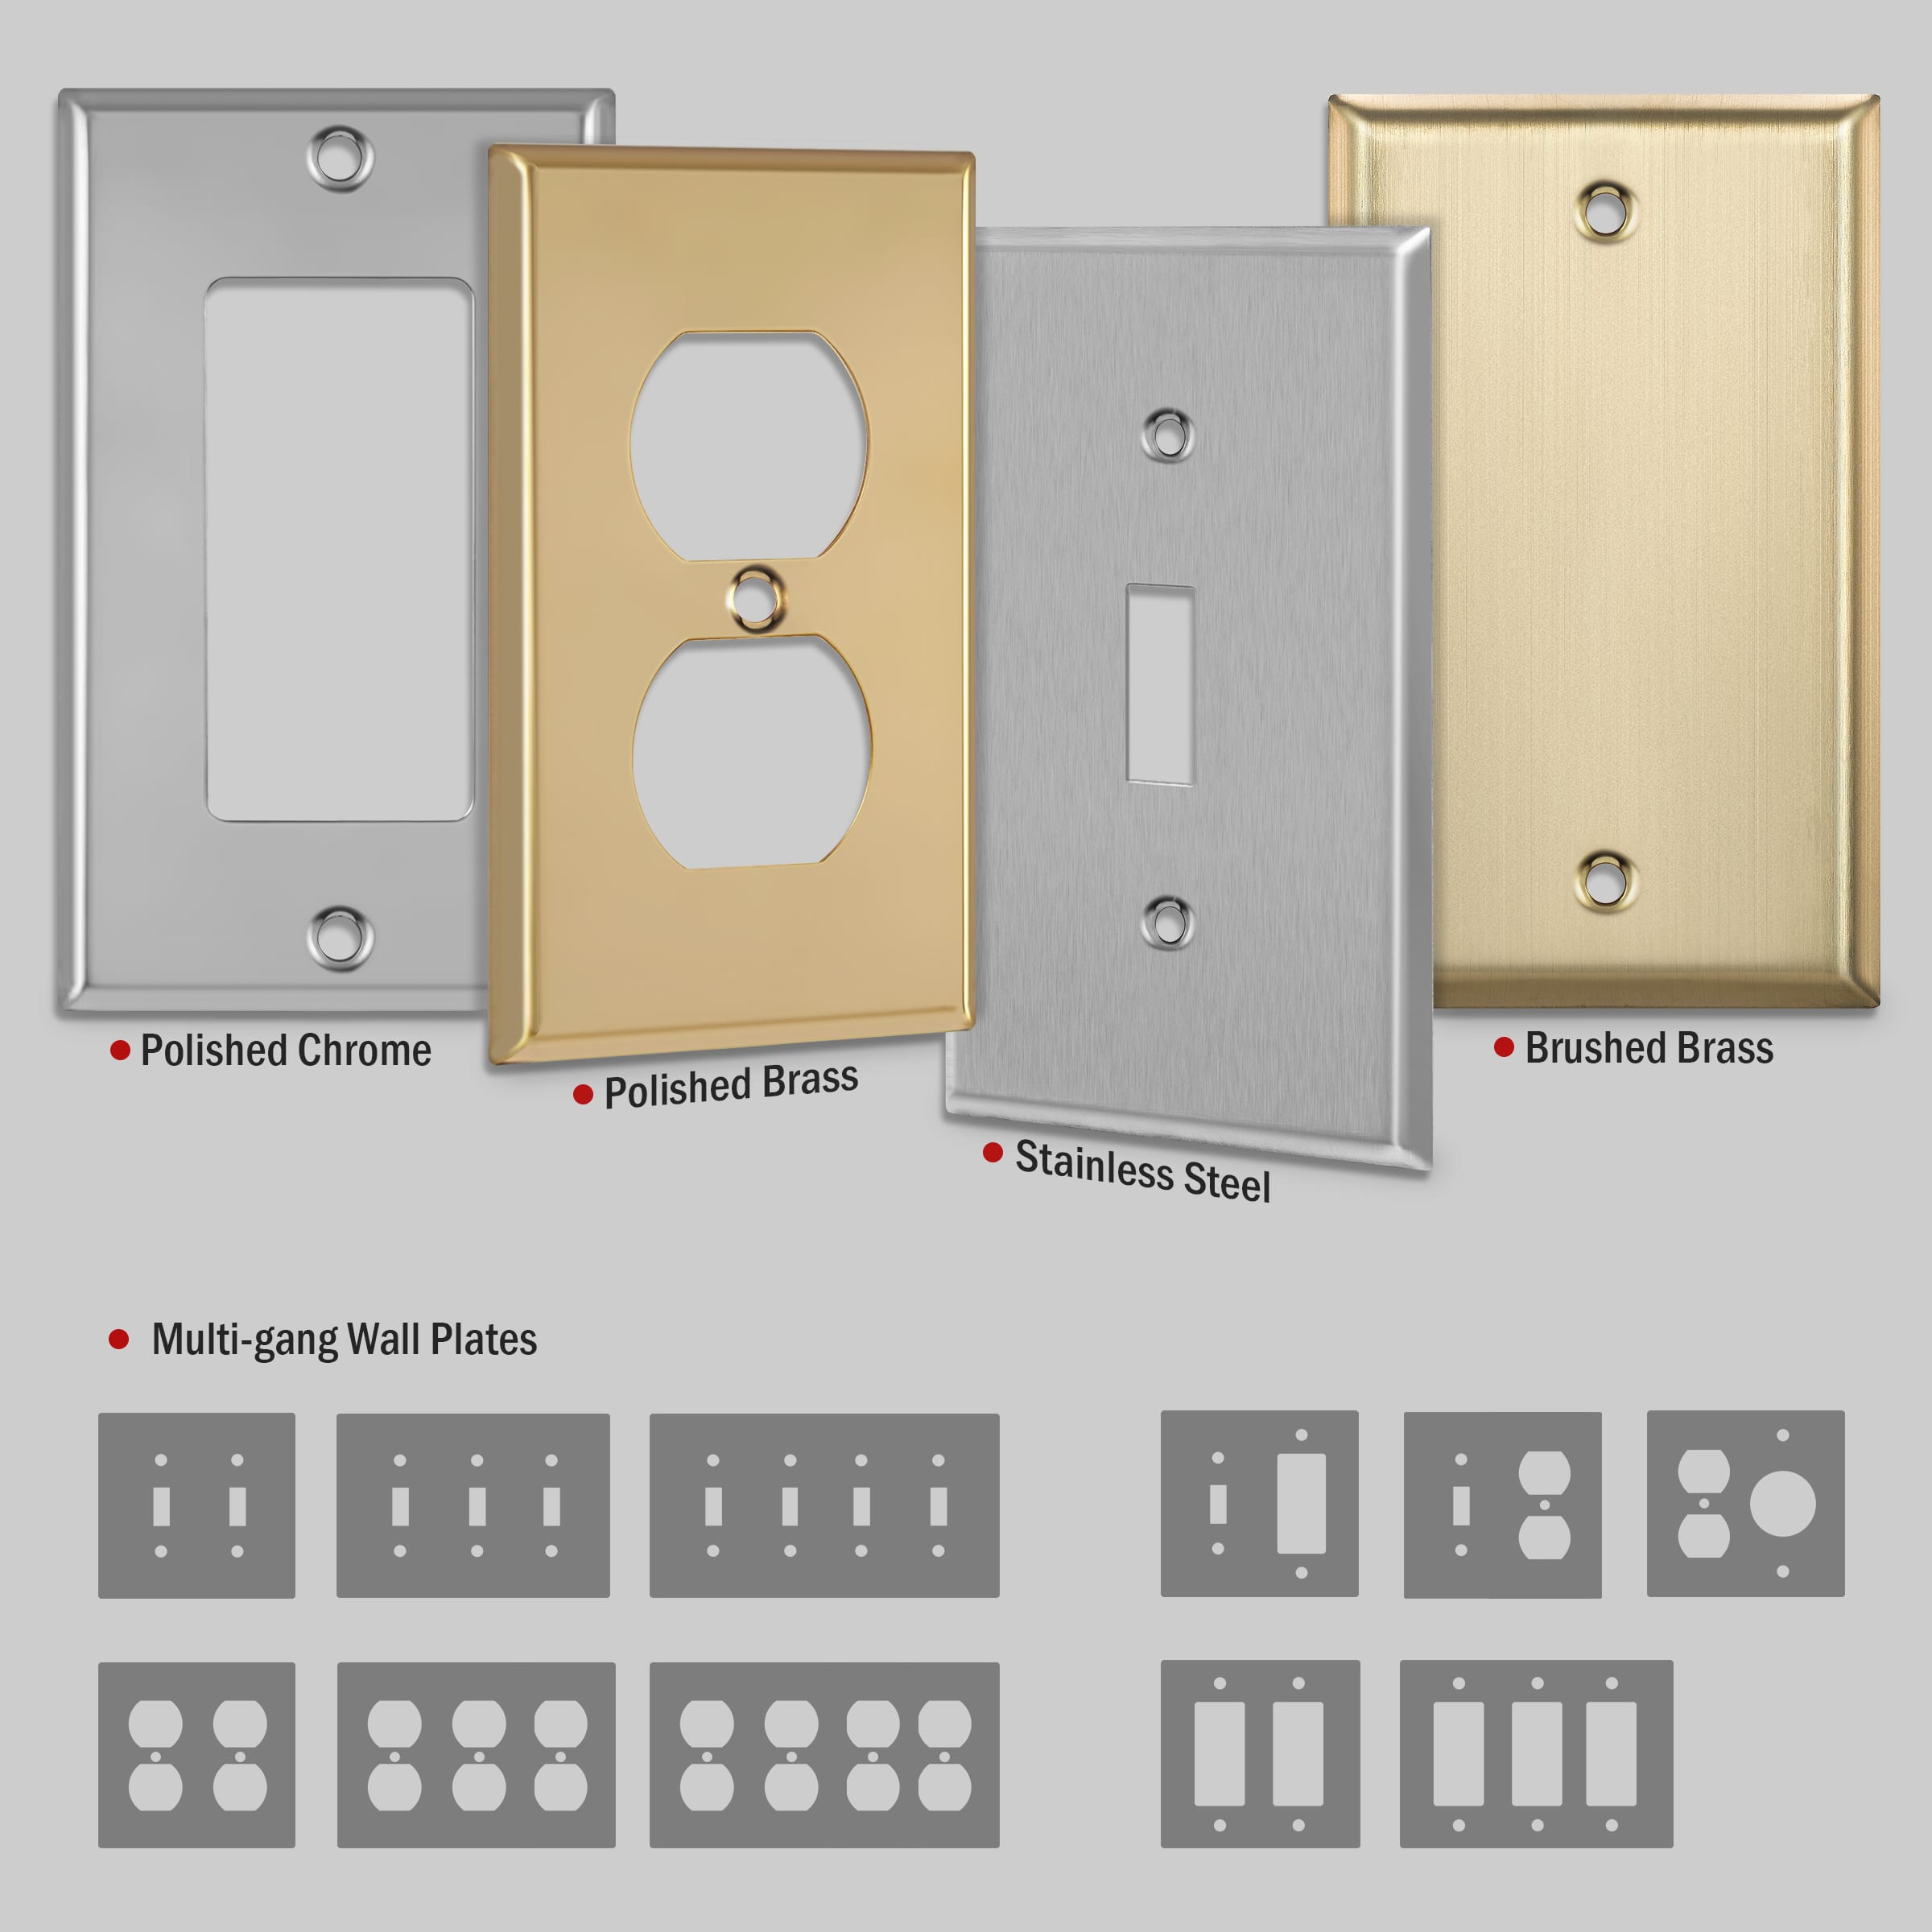 3-Gang Stainless Steel Duplex Outlet Wall Plate